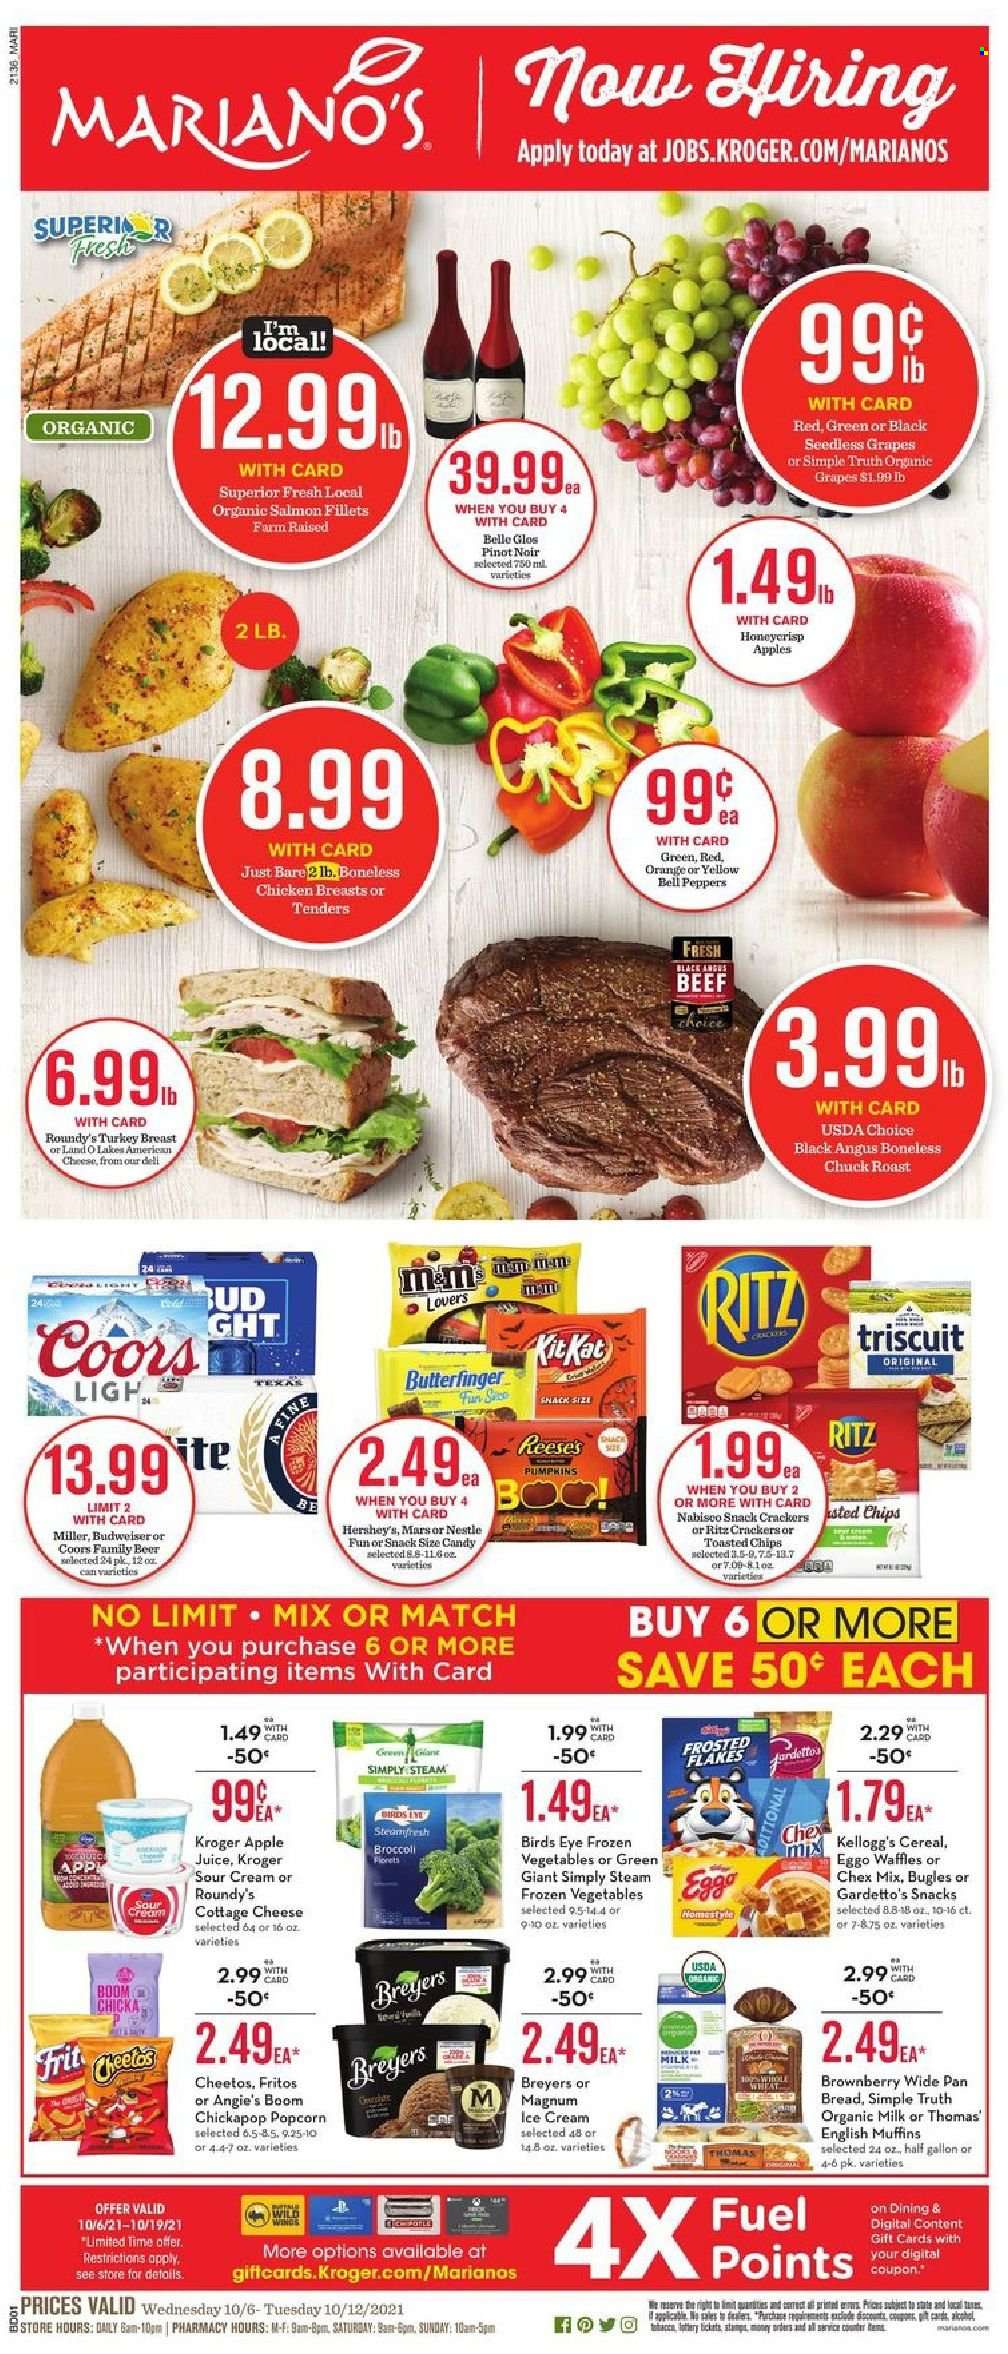 thumbnail - Mariano’s Flyer - 10/06/2021 - 10/12/2021 - Sales products - seedless grapes, english muffins, waffles, broccoli, pumpkin, peppers, grapes, oranges, carp, salmon, salmon fillet, Bird's Eye, cottage cheese, cheese, organic milk, eggs, sour cream, Magnum, Reese's, Hershey's, frozen vegetables, Nestlé, snack, crackers, Kellogg's, RITZ, Fritos, Cheetos, popcorn, Chex Mix, cereals, Frosted Flakes, apple juice, juice, red wine, wine, Pinot Noir, alcohol, beer, Miller, turkey breast, chicken breasts, beef meat, chuck roast, pan, Coors. Page 1.